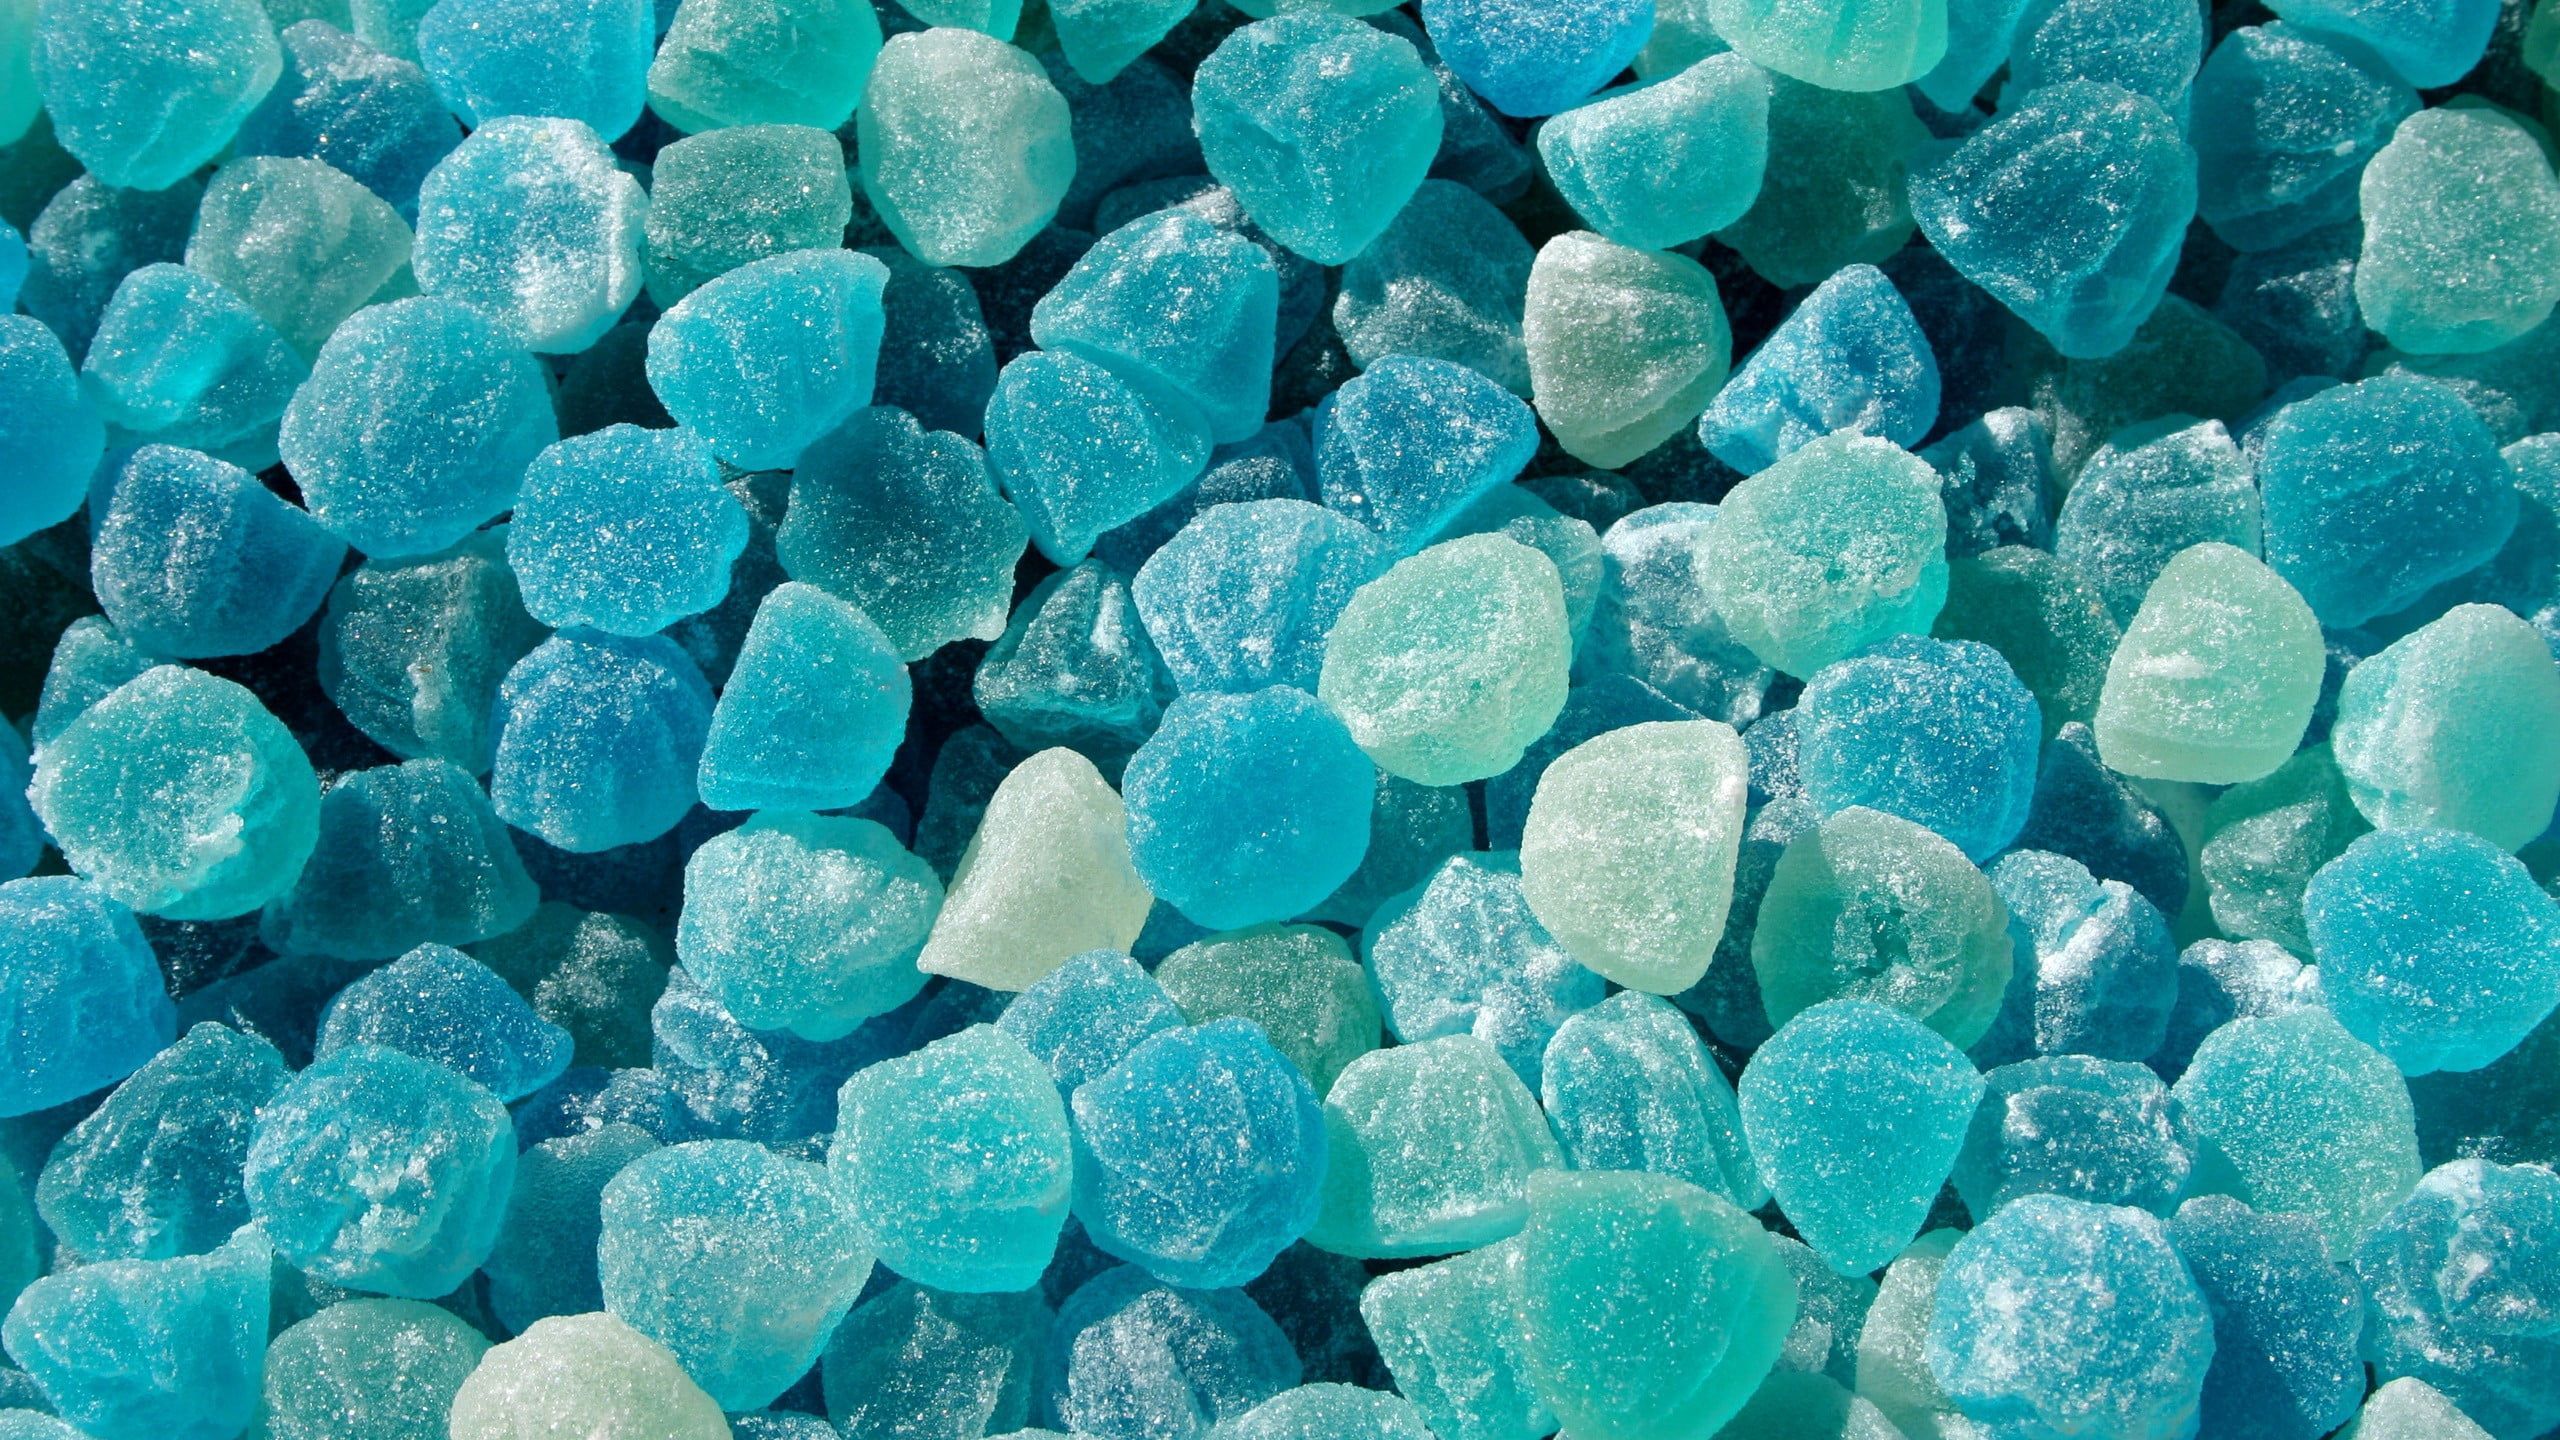 A pile of blue and green hard candies - Cyan, candy